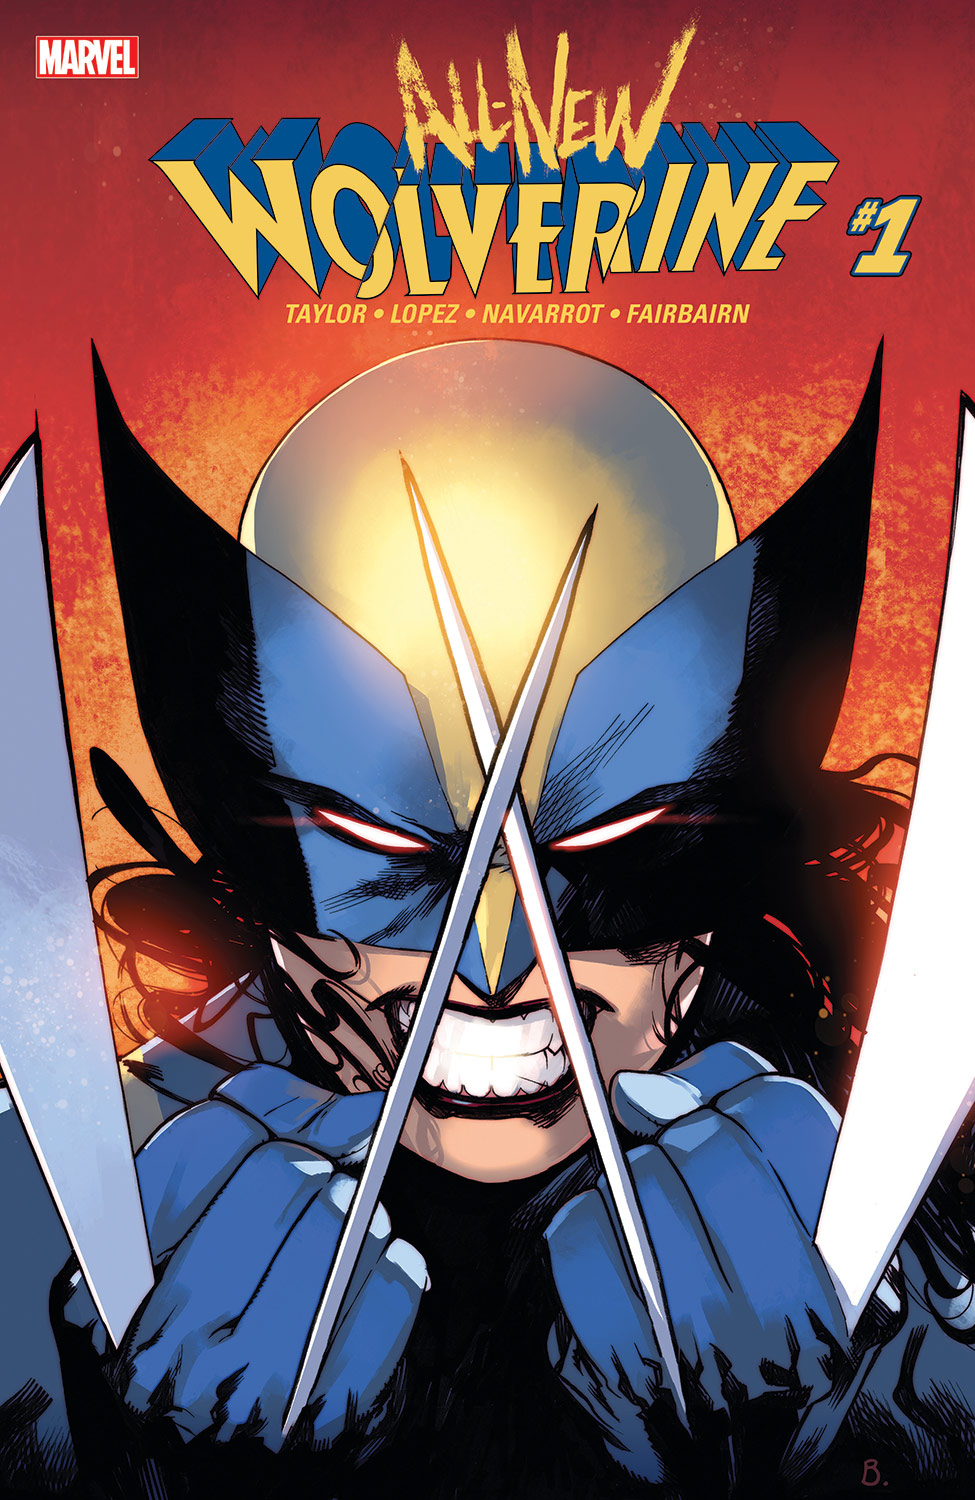 All-New Wolverine (2015) #1